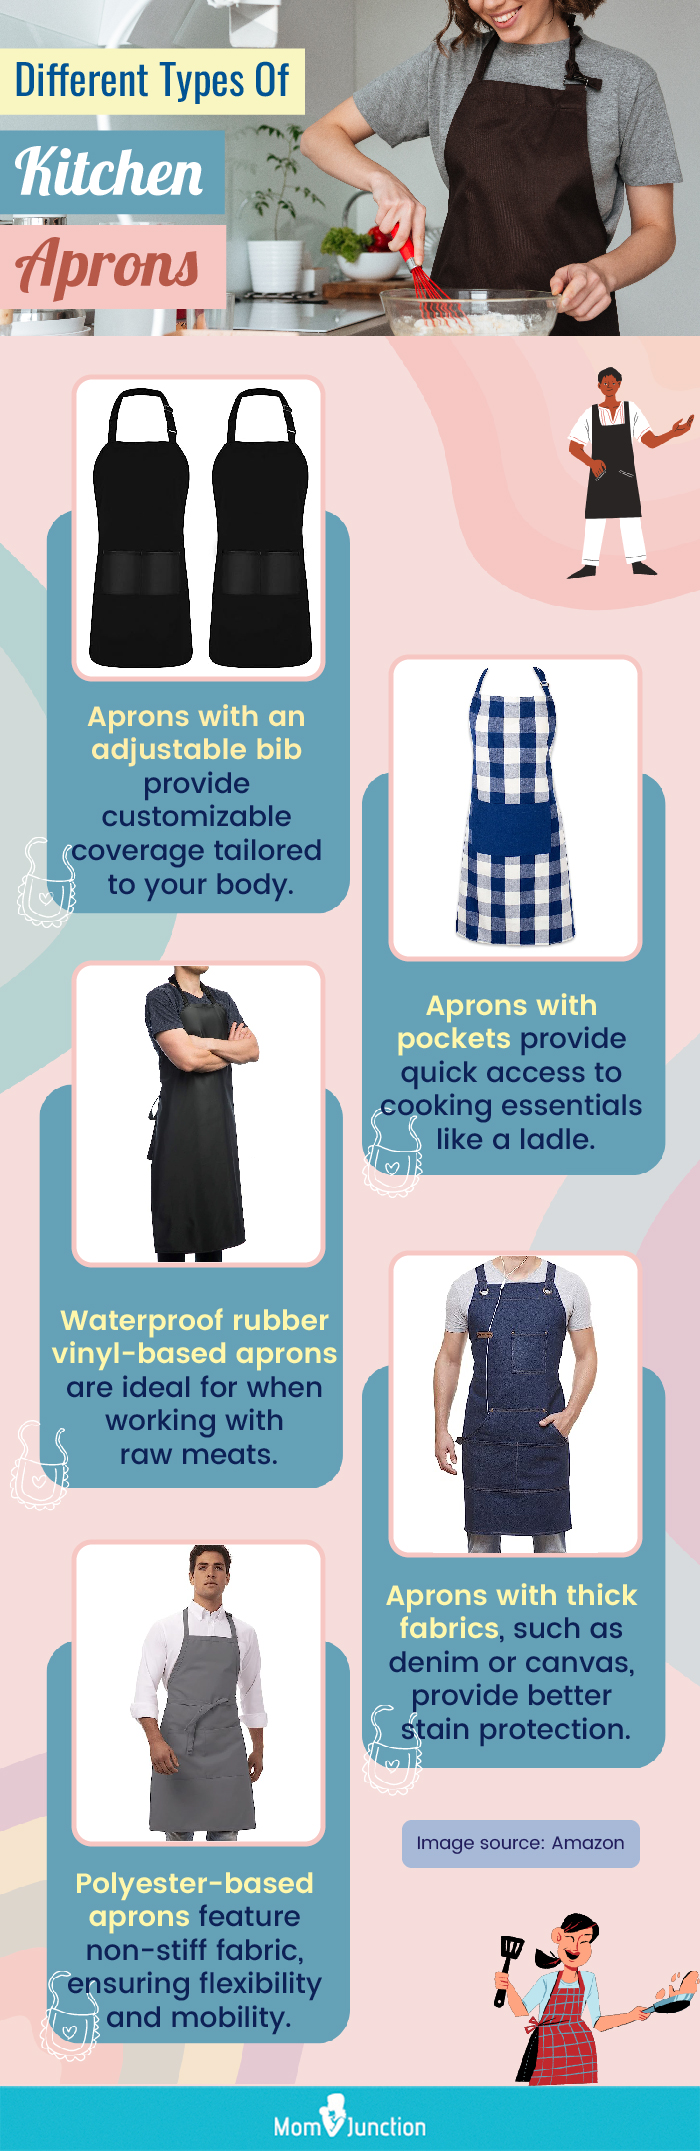 Different Types Of Kitchen Aprons (infographic)